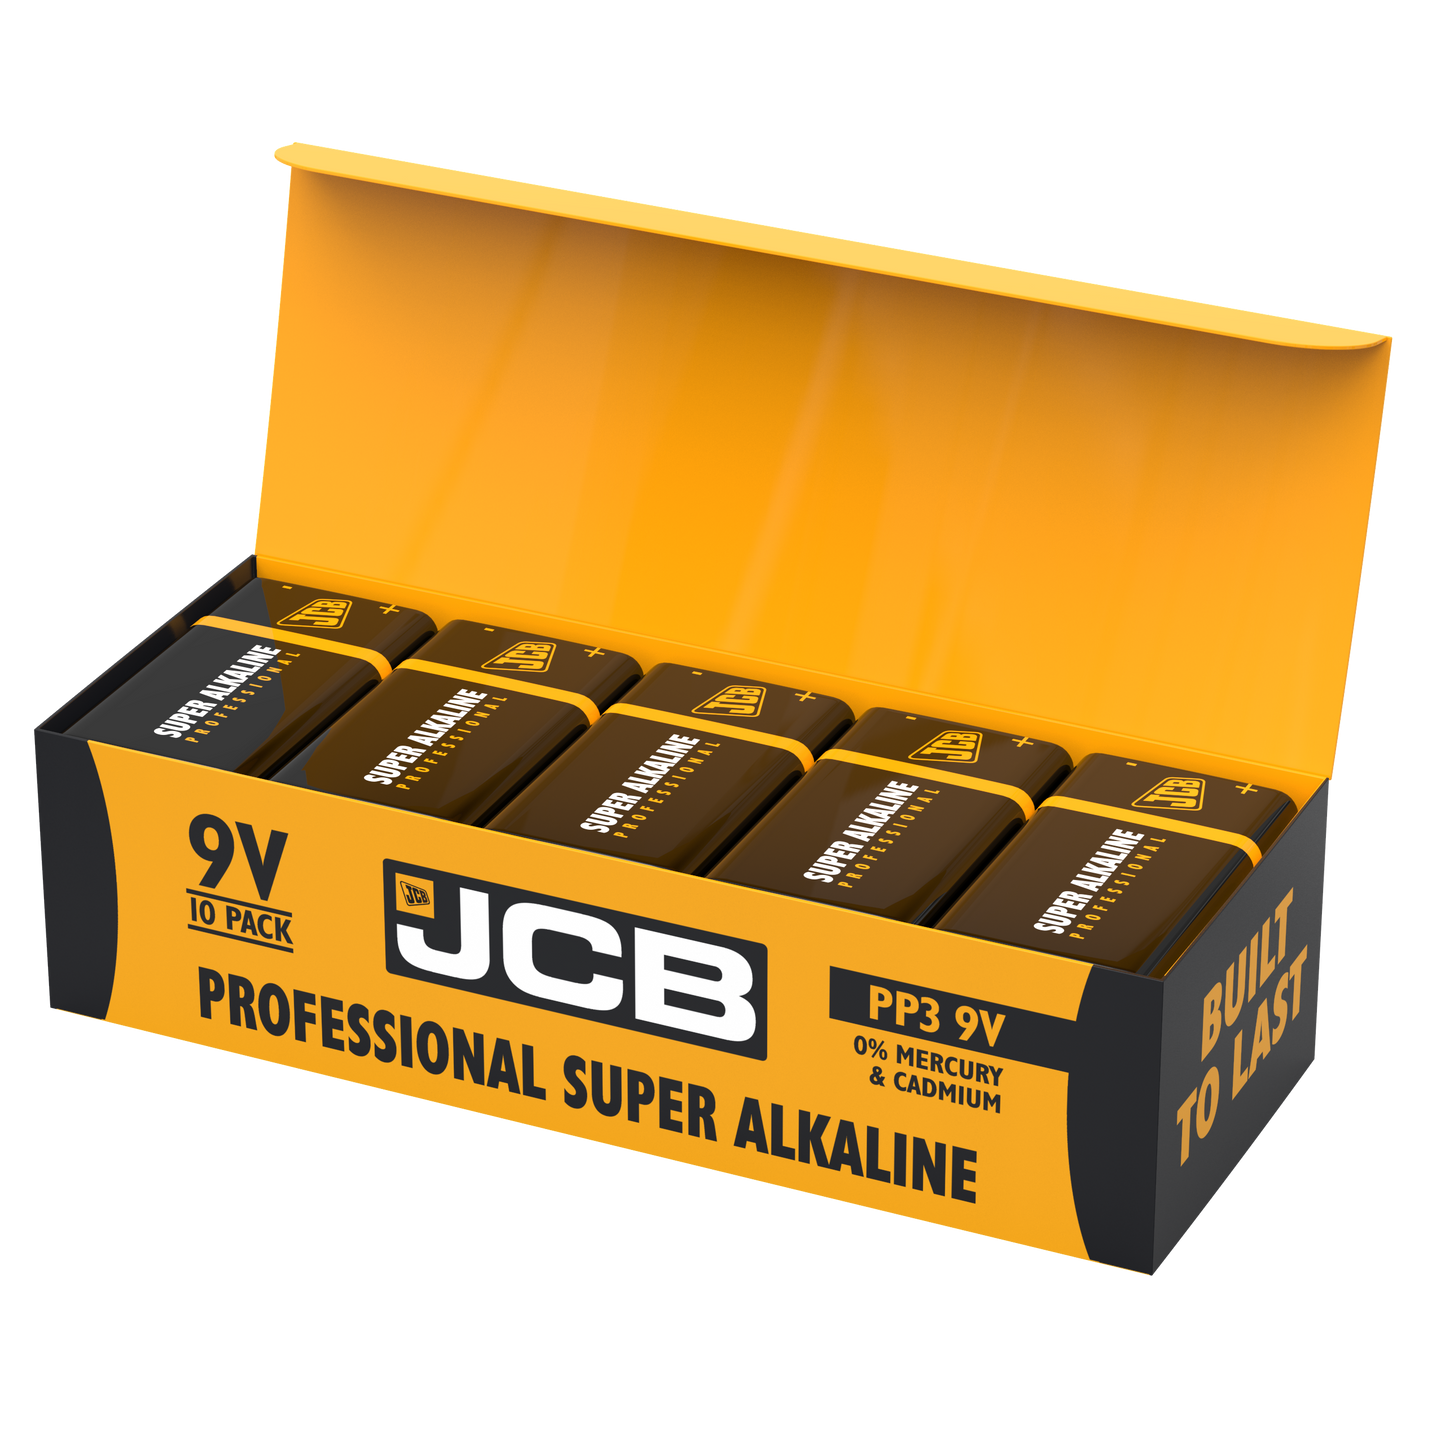 JCB 9V Industrial, Pack of 10 - Priced & Sold Per Cell